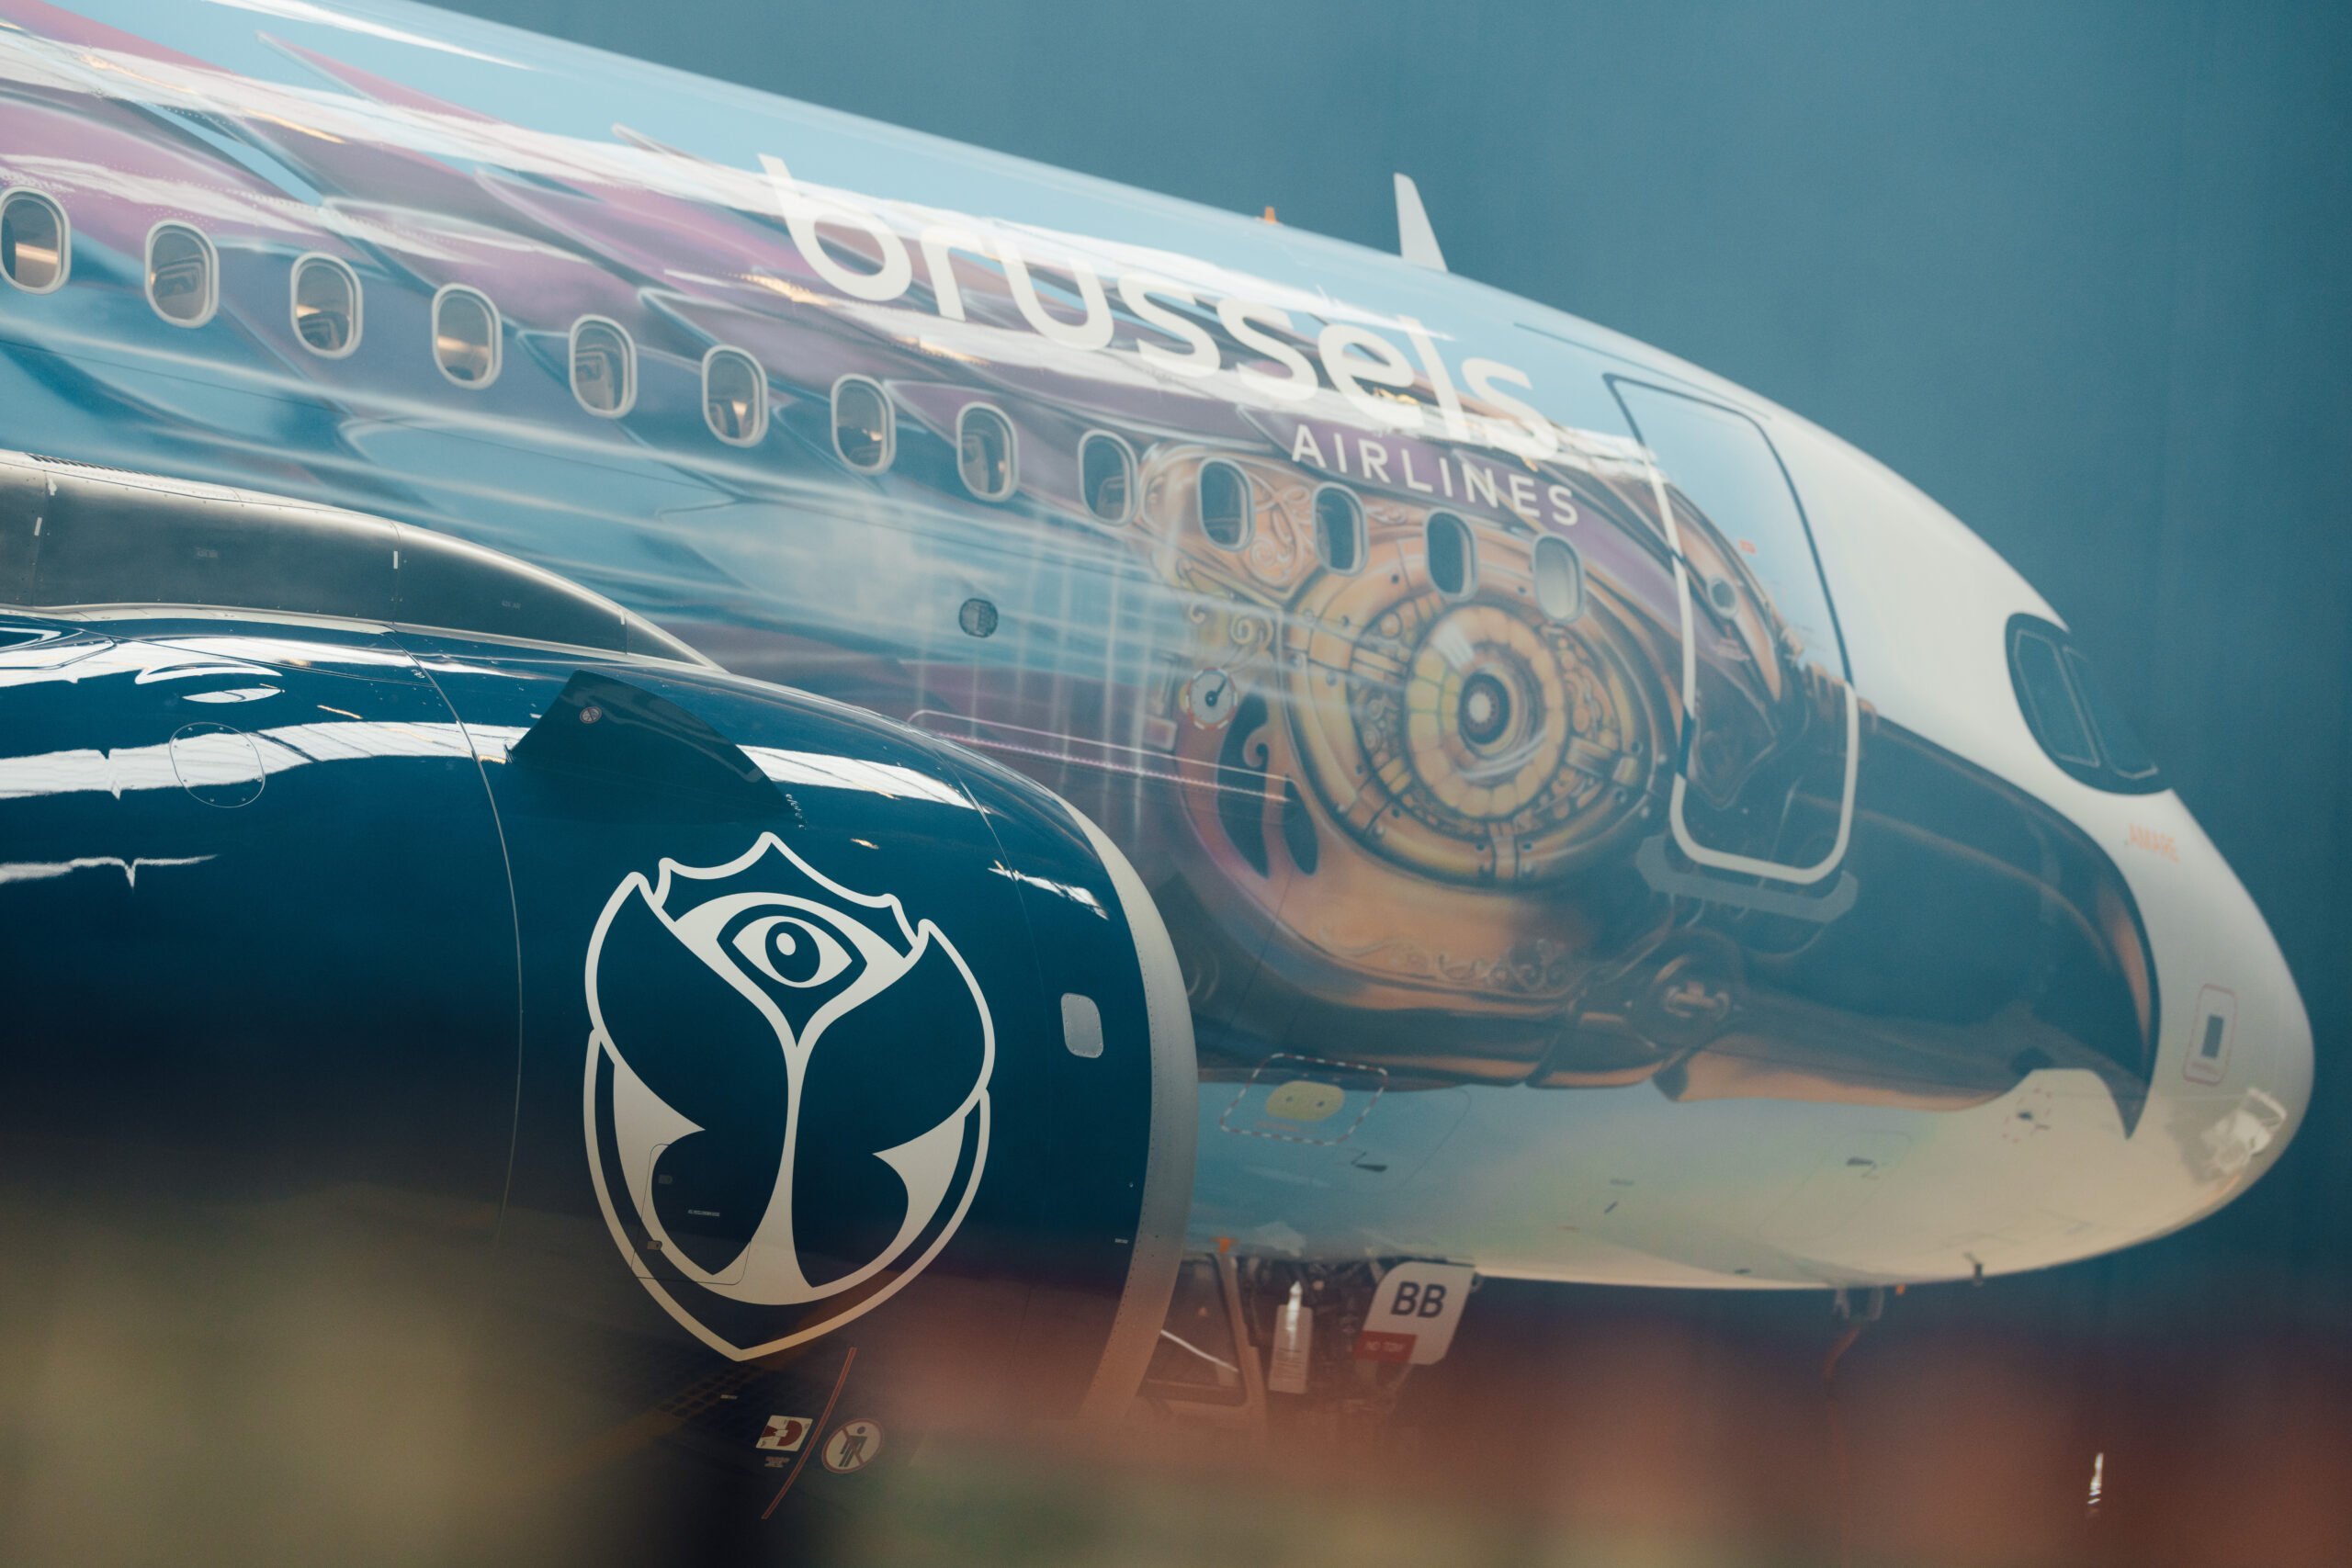 Tomorrowland unites with Brussels Airlines to present augmented reality airplane